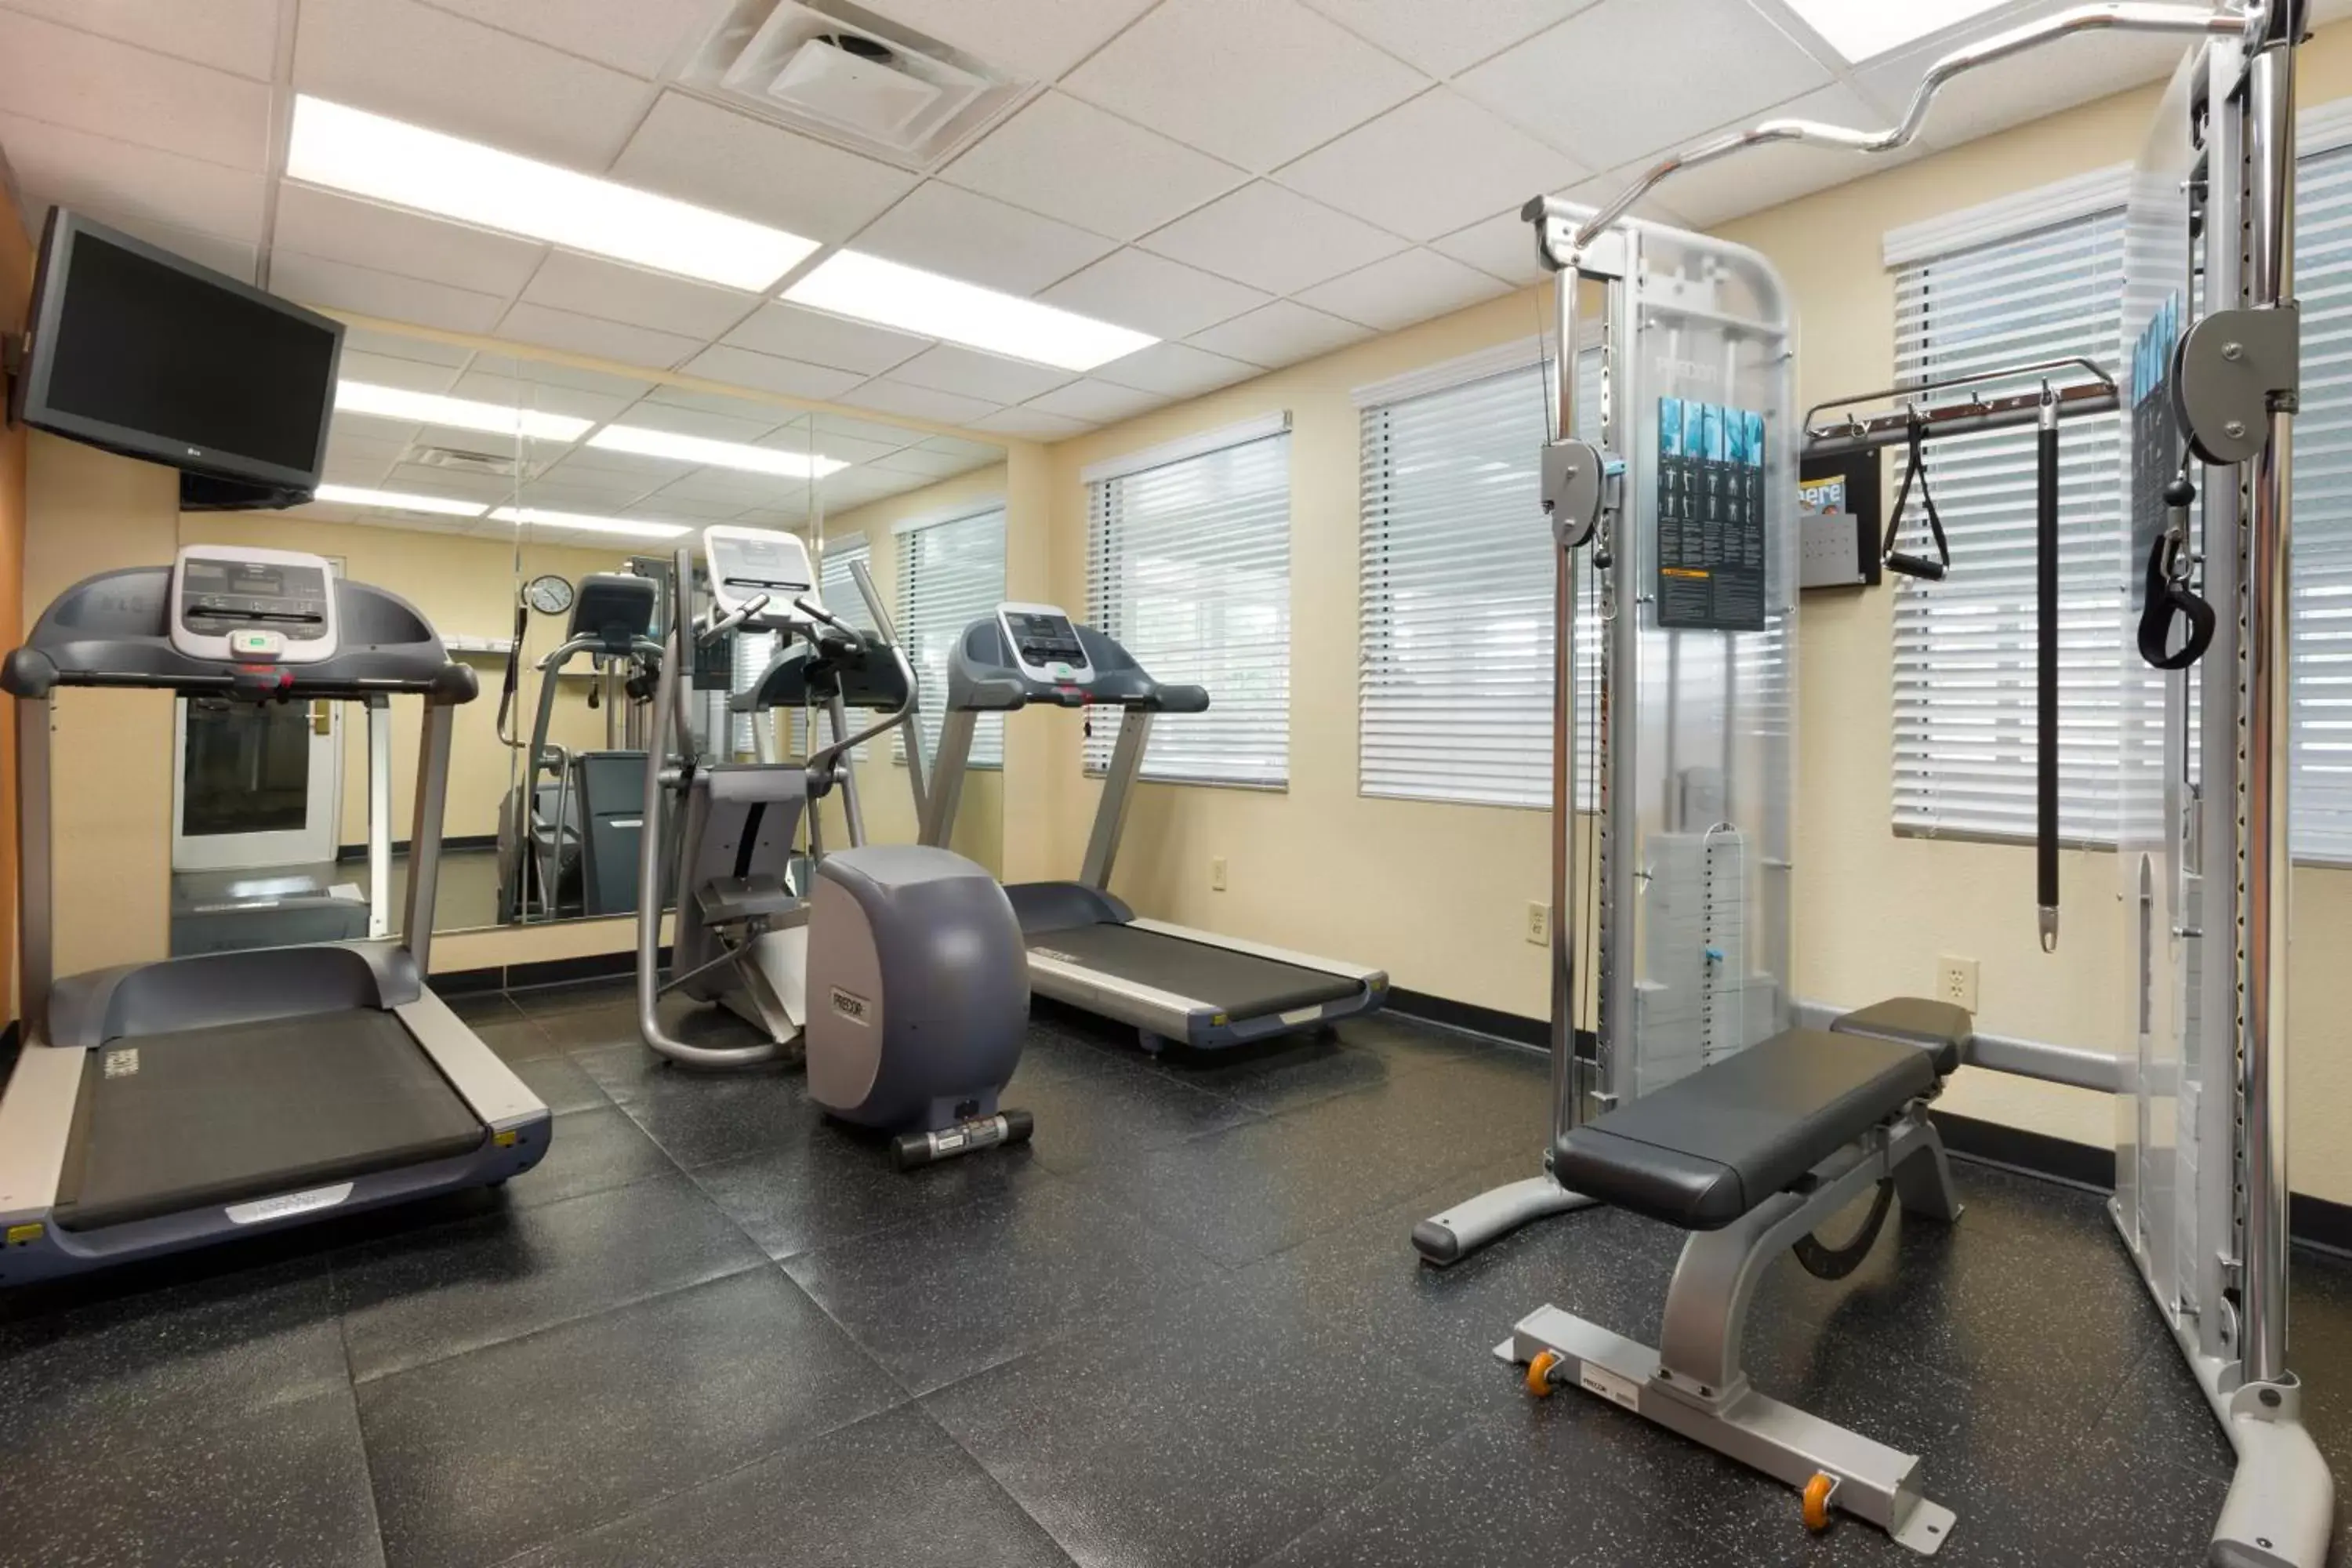 Fitness centre/facilities in Country Inn & Suites by Radisson, Stone Mountain, GA